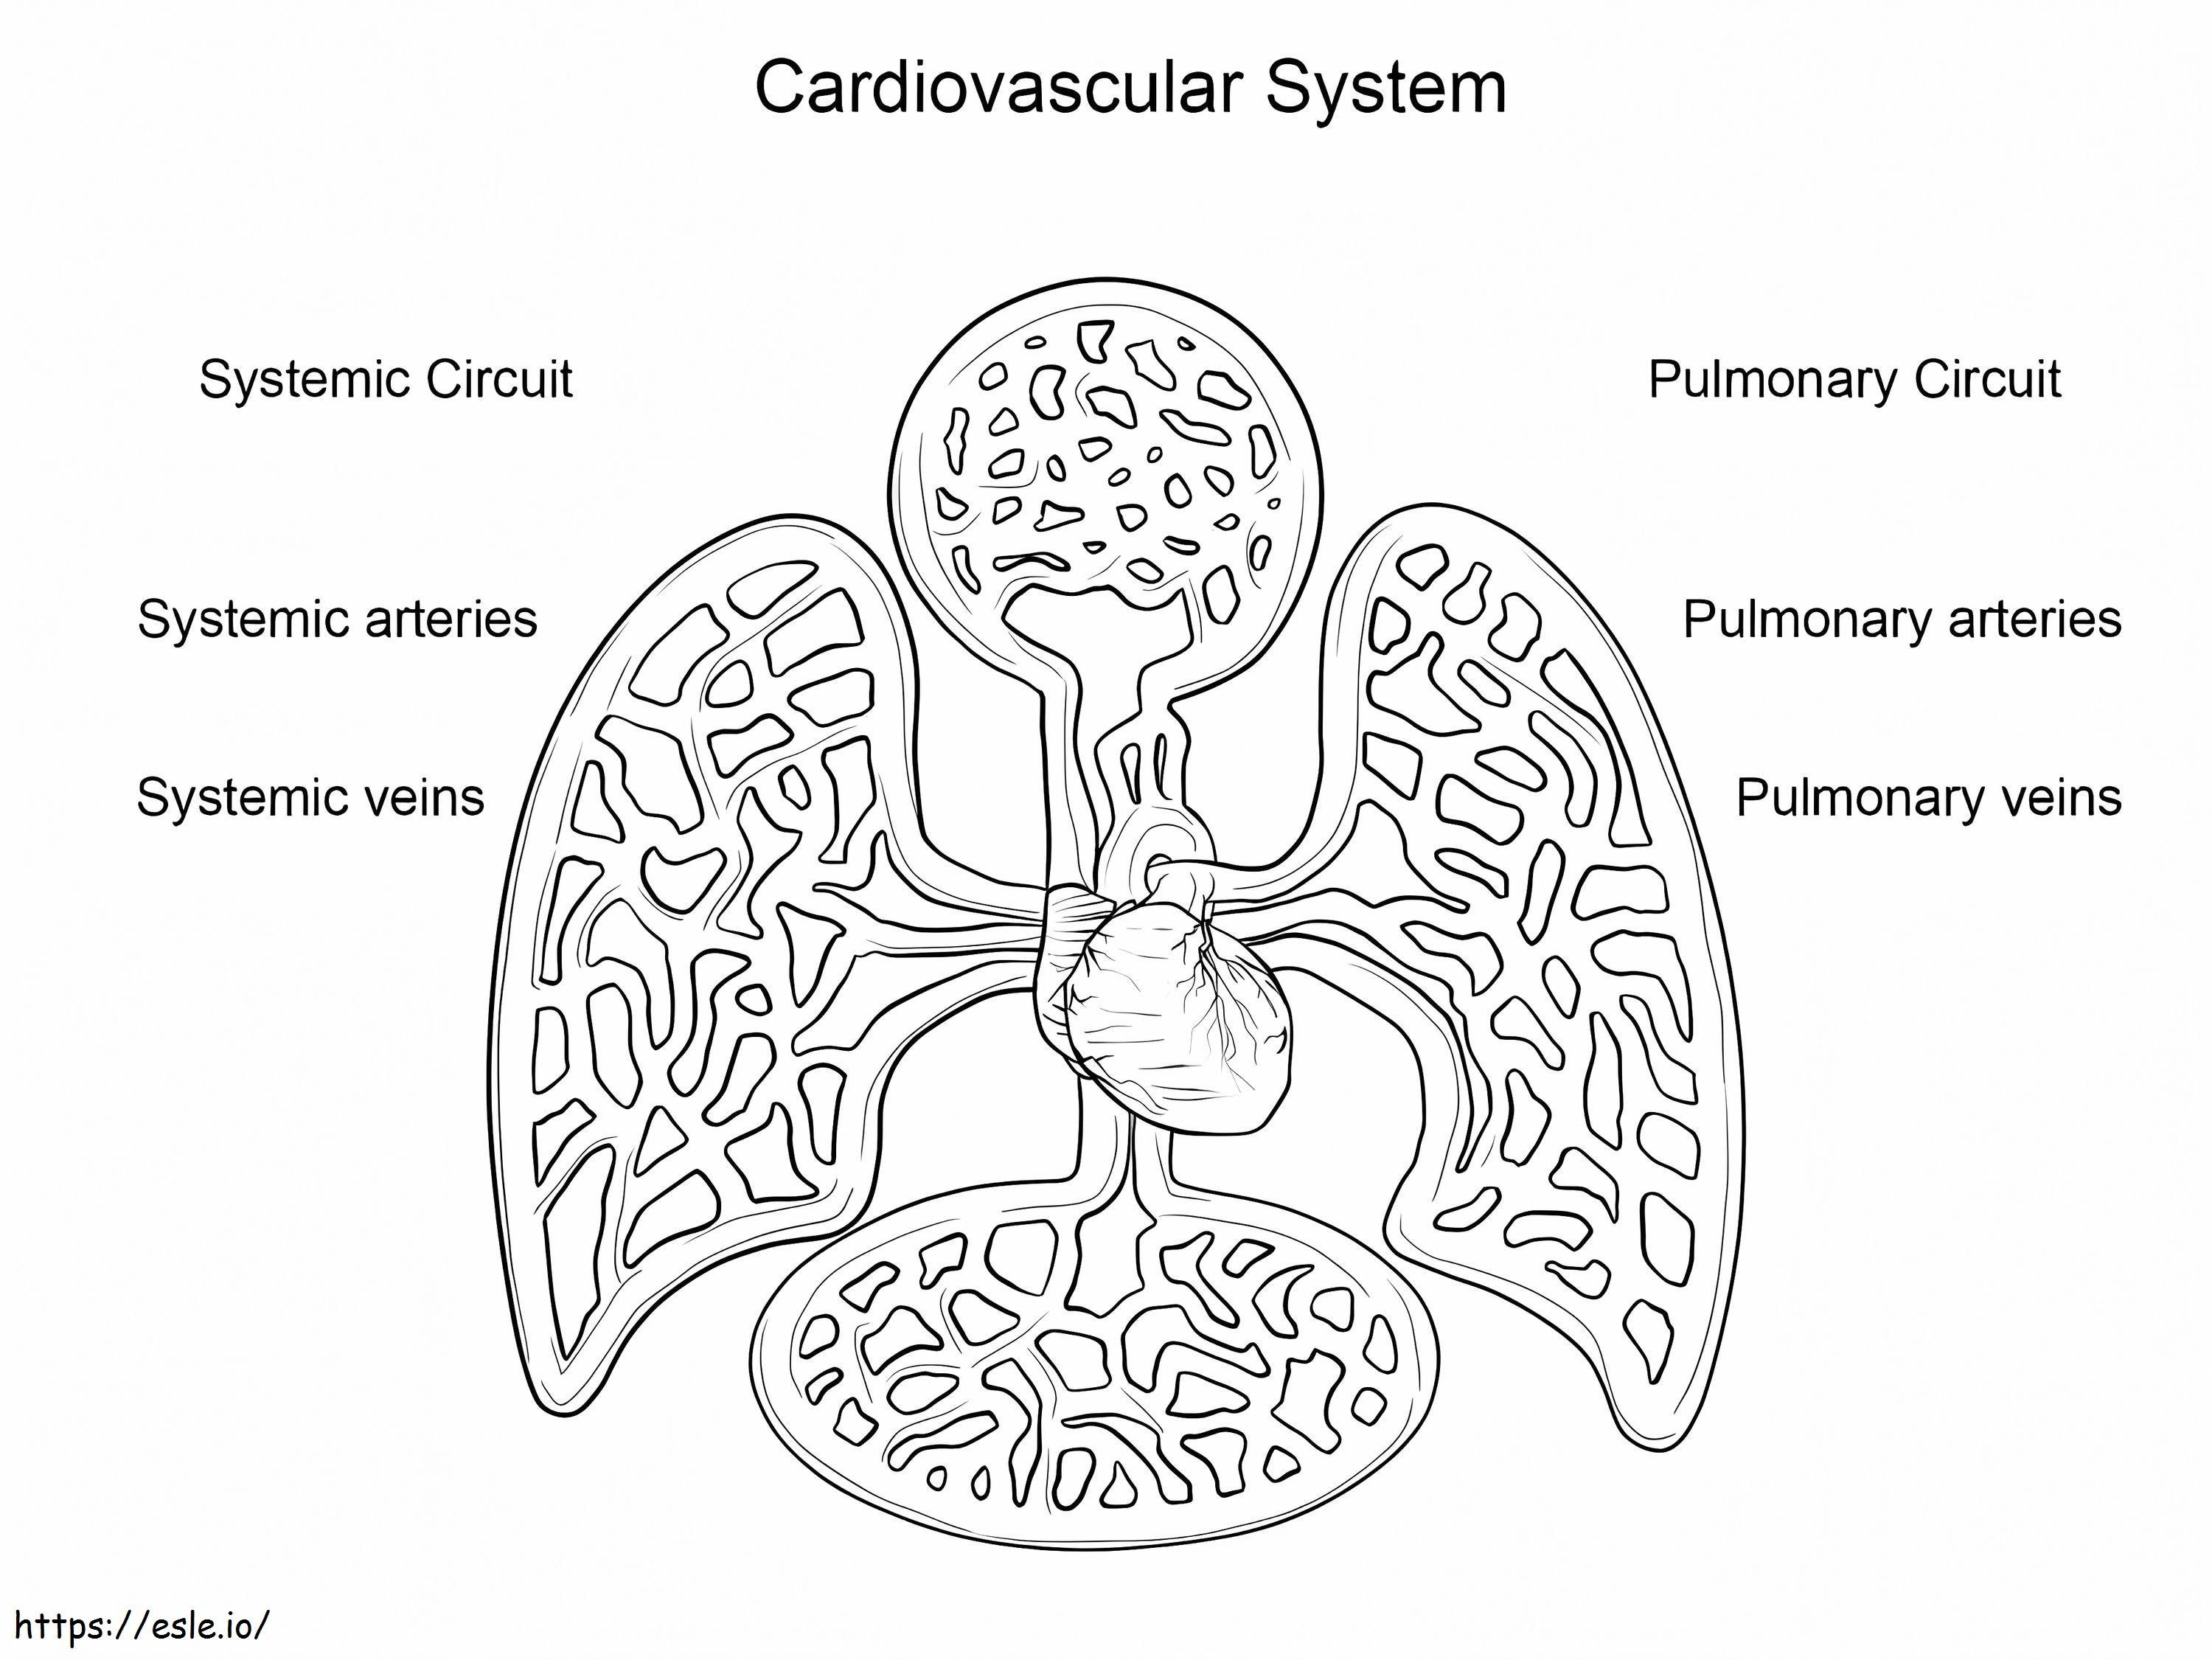 Cardiovascular System coloring page